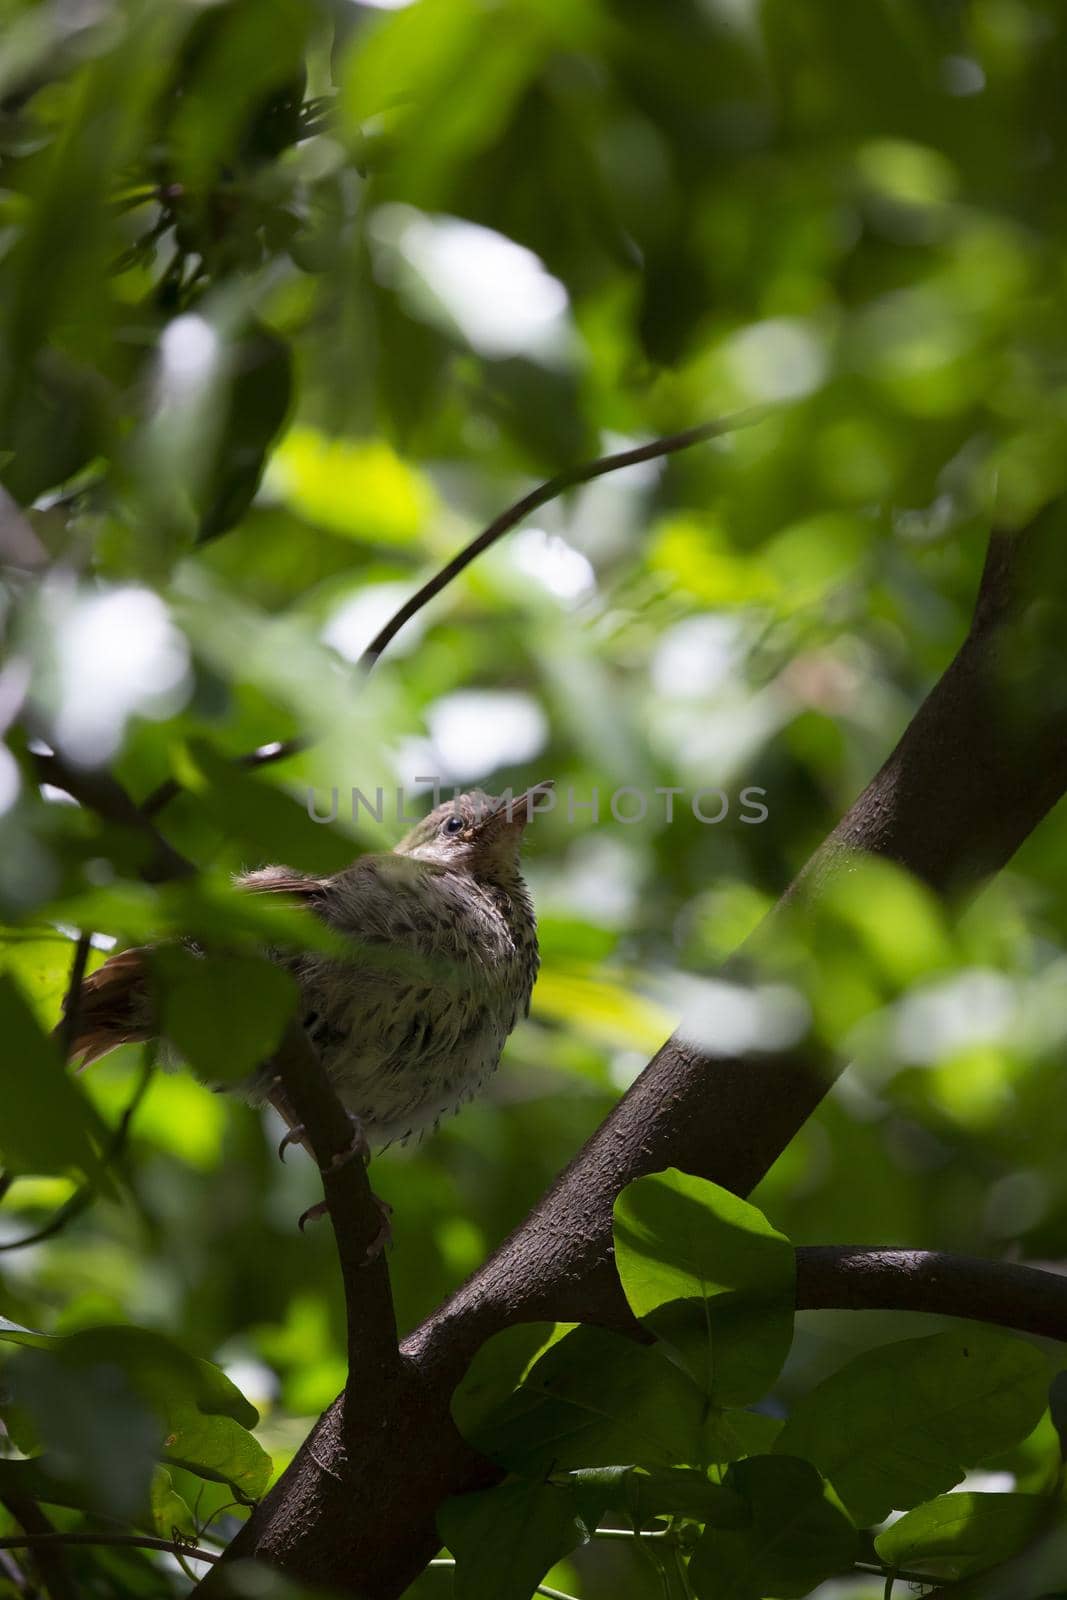 Juvenile brown thrasher bird (Toxostoma rufum) looking around from a perch in a bush